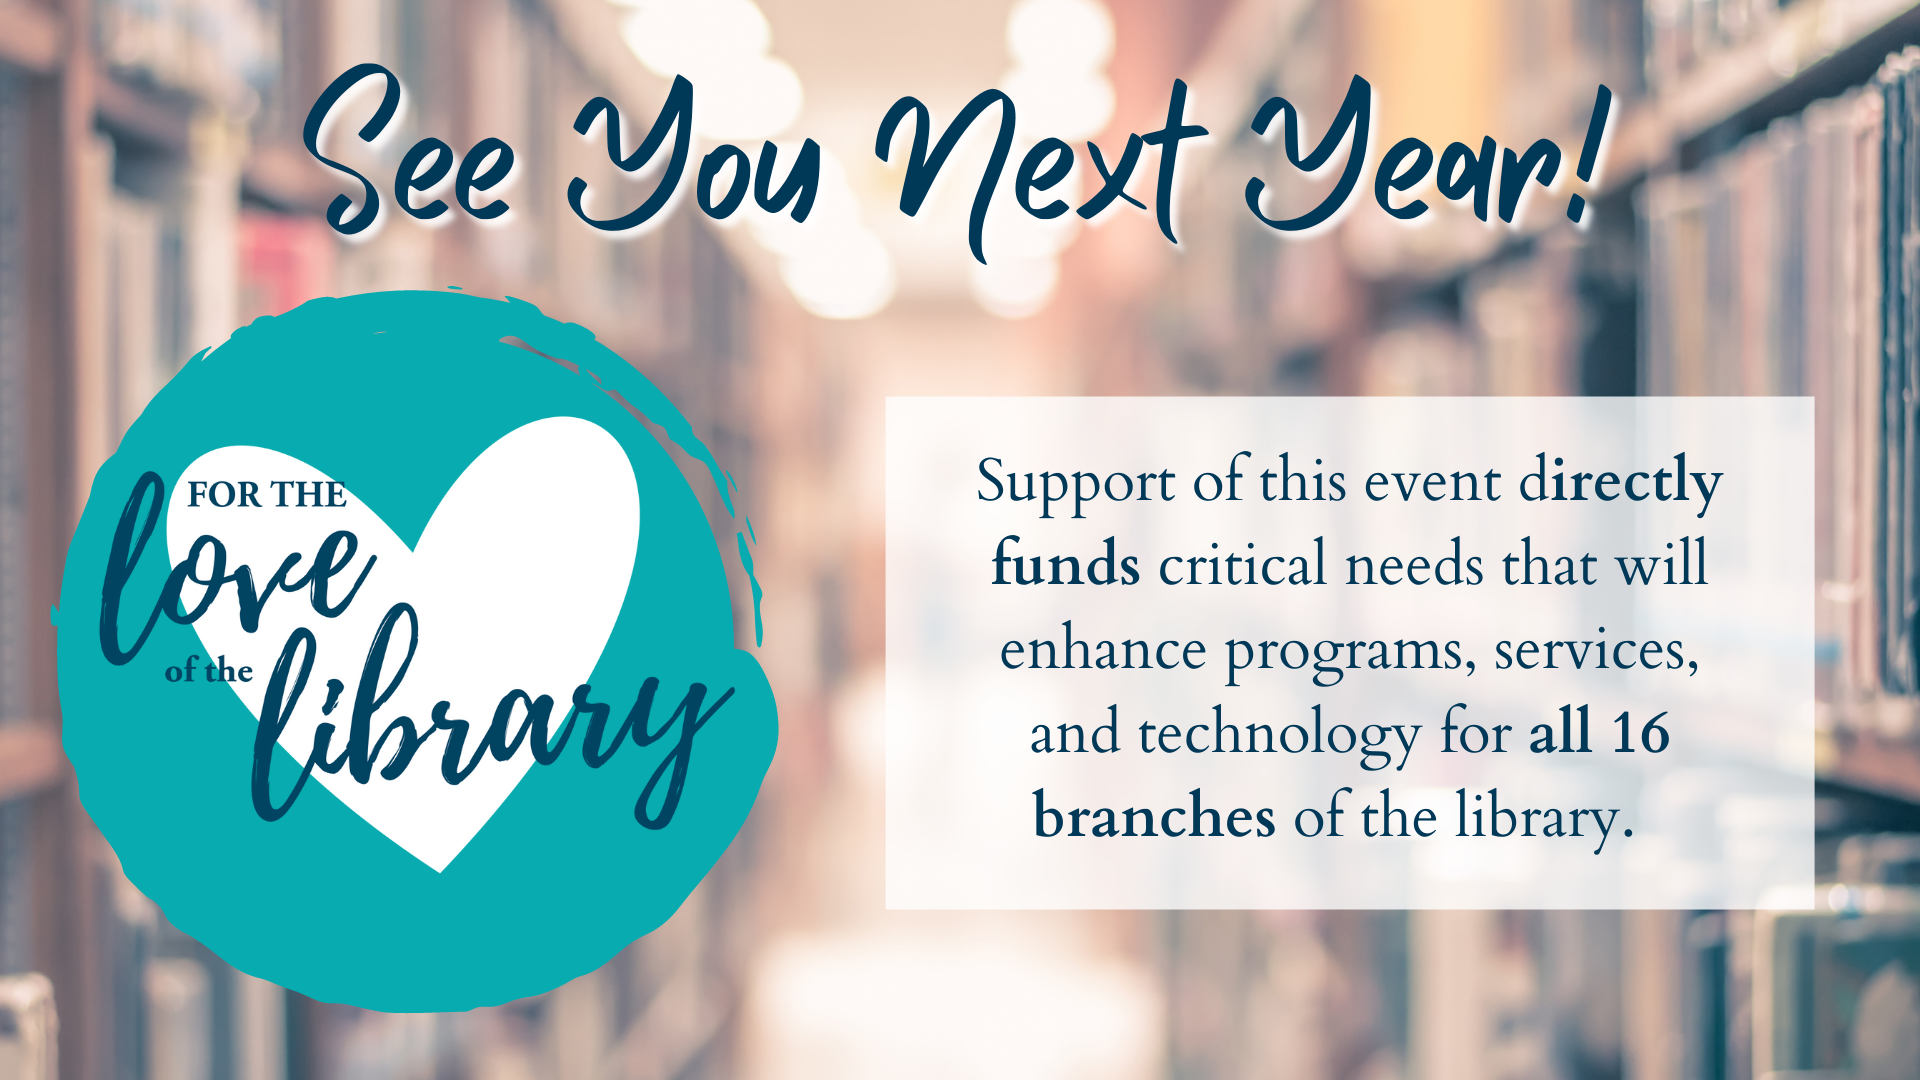 For the Love of the Library banner: See You Next Year! "Support of this event directly funds critical needs that will enhance programs, services, and technology for all 16 branches of the library"